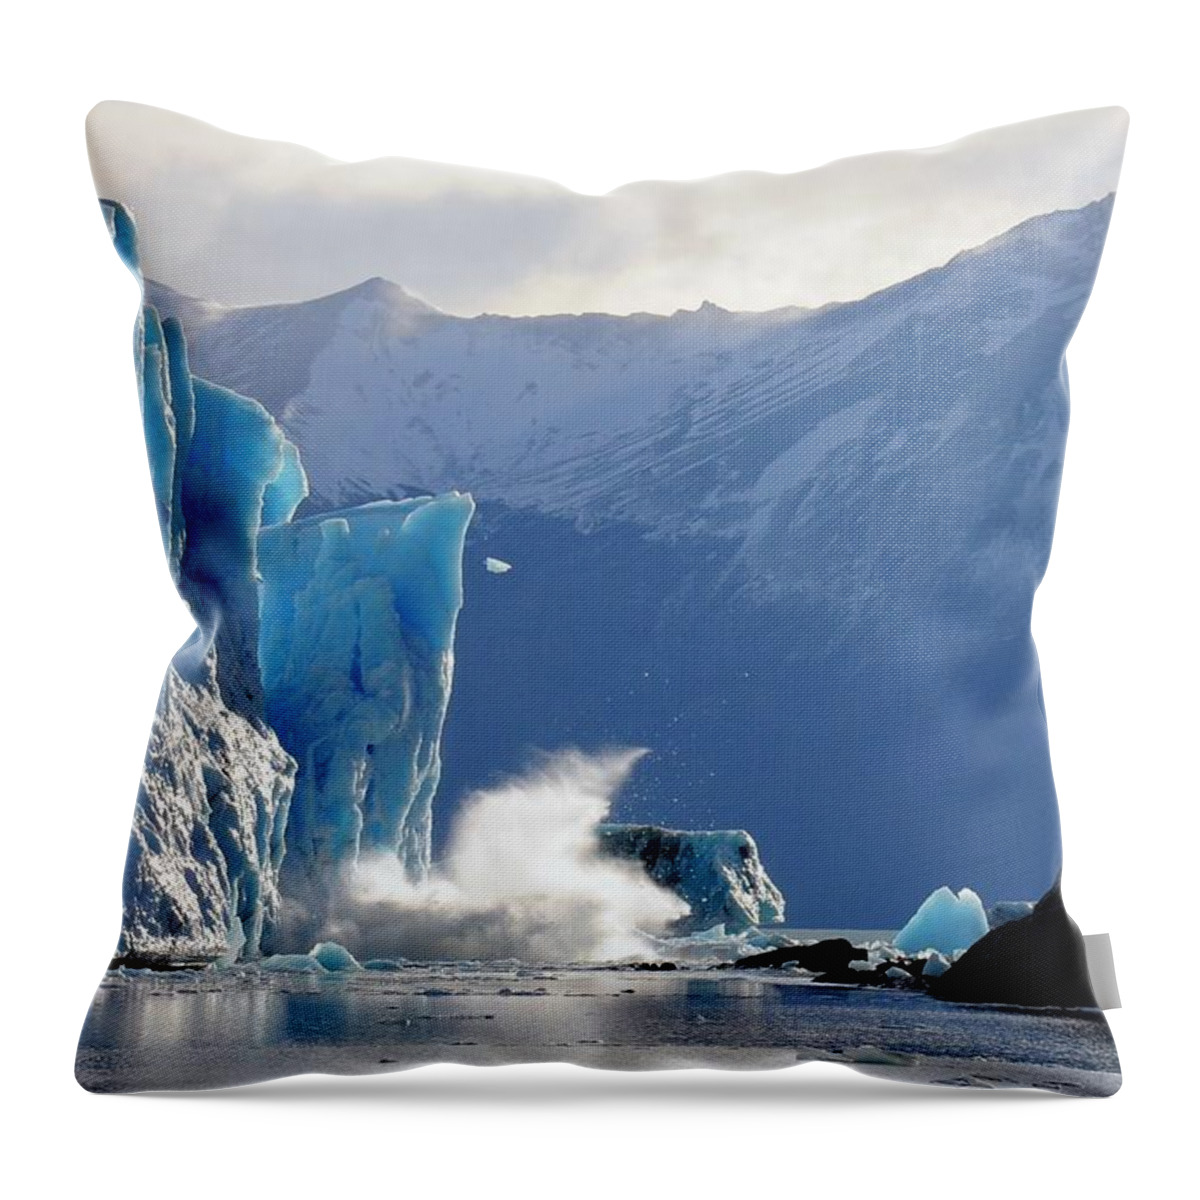 Scenics Throw Pillow featuring the photograph Broken Ice by Edith Polverini